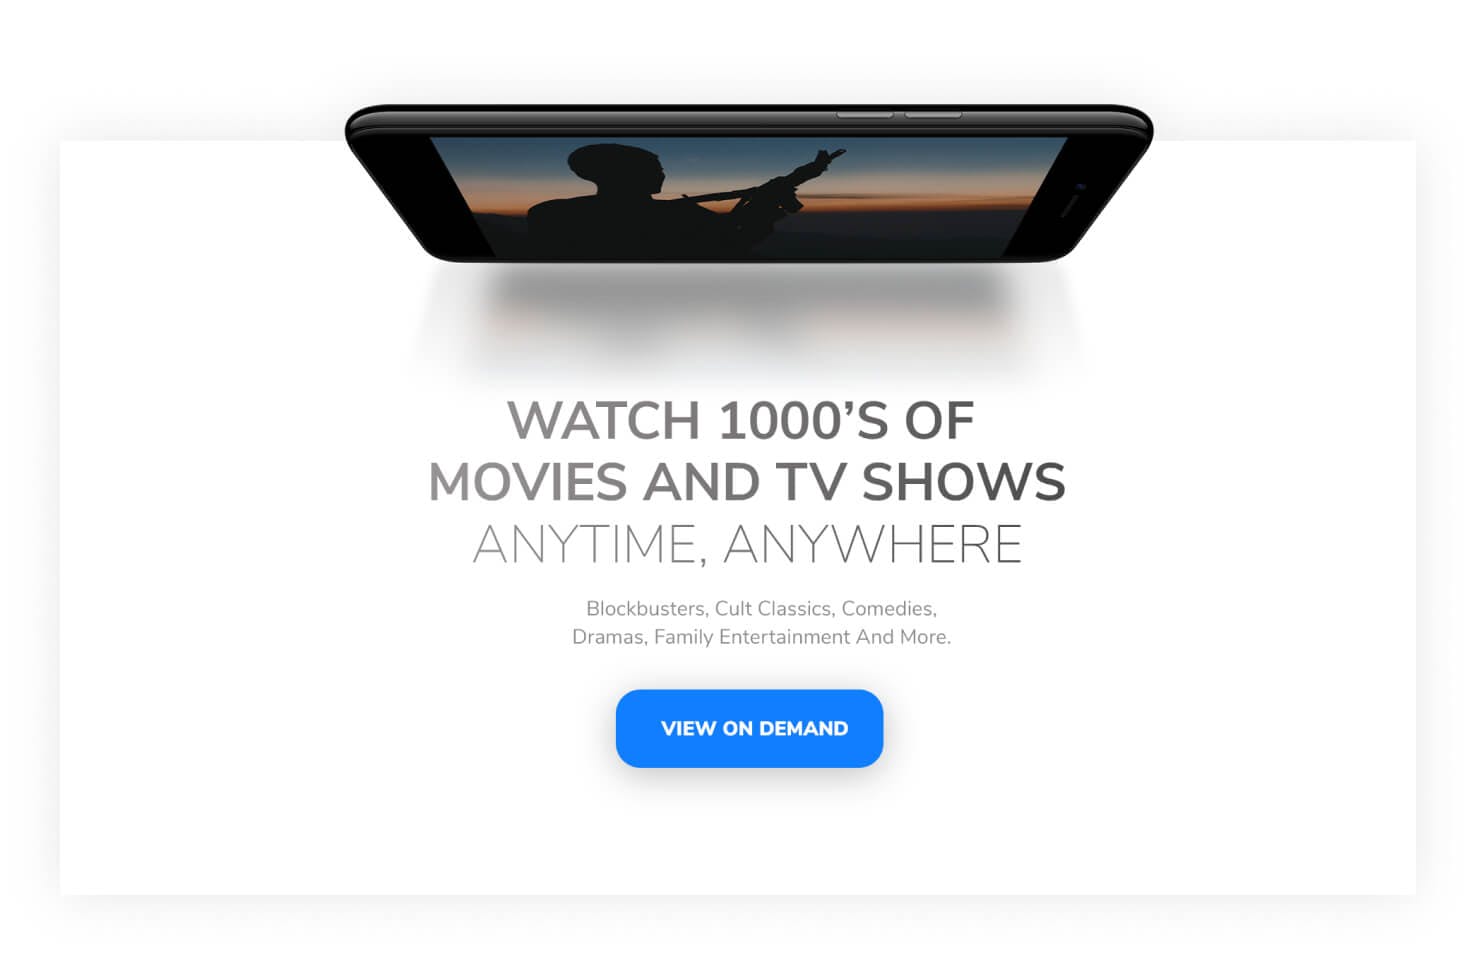 Watch 1000's of movies and TV shows